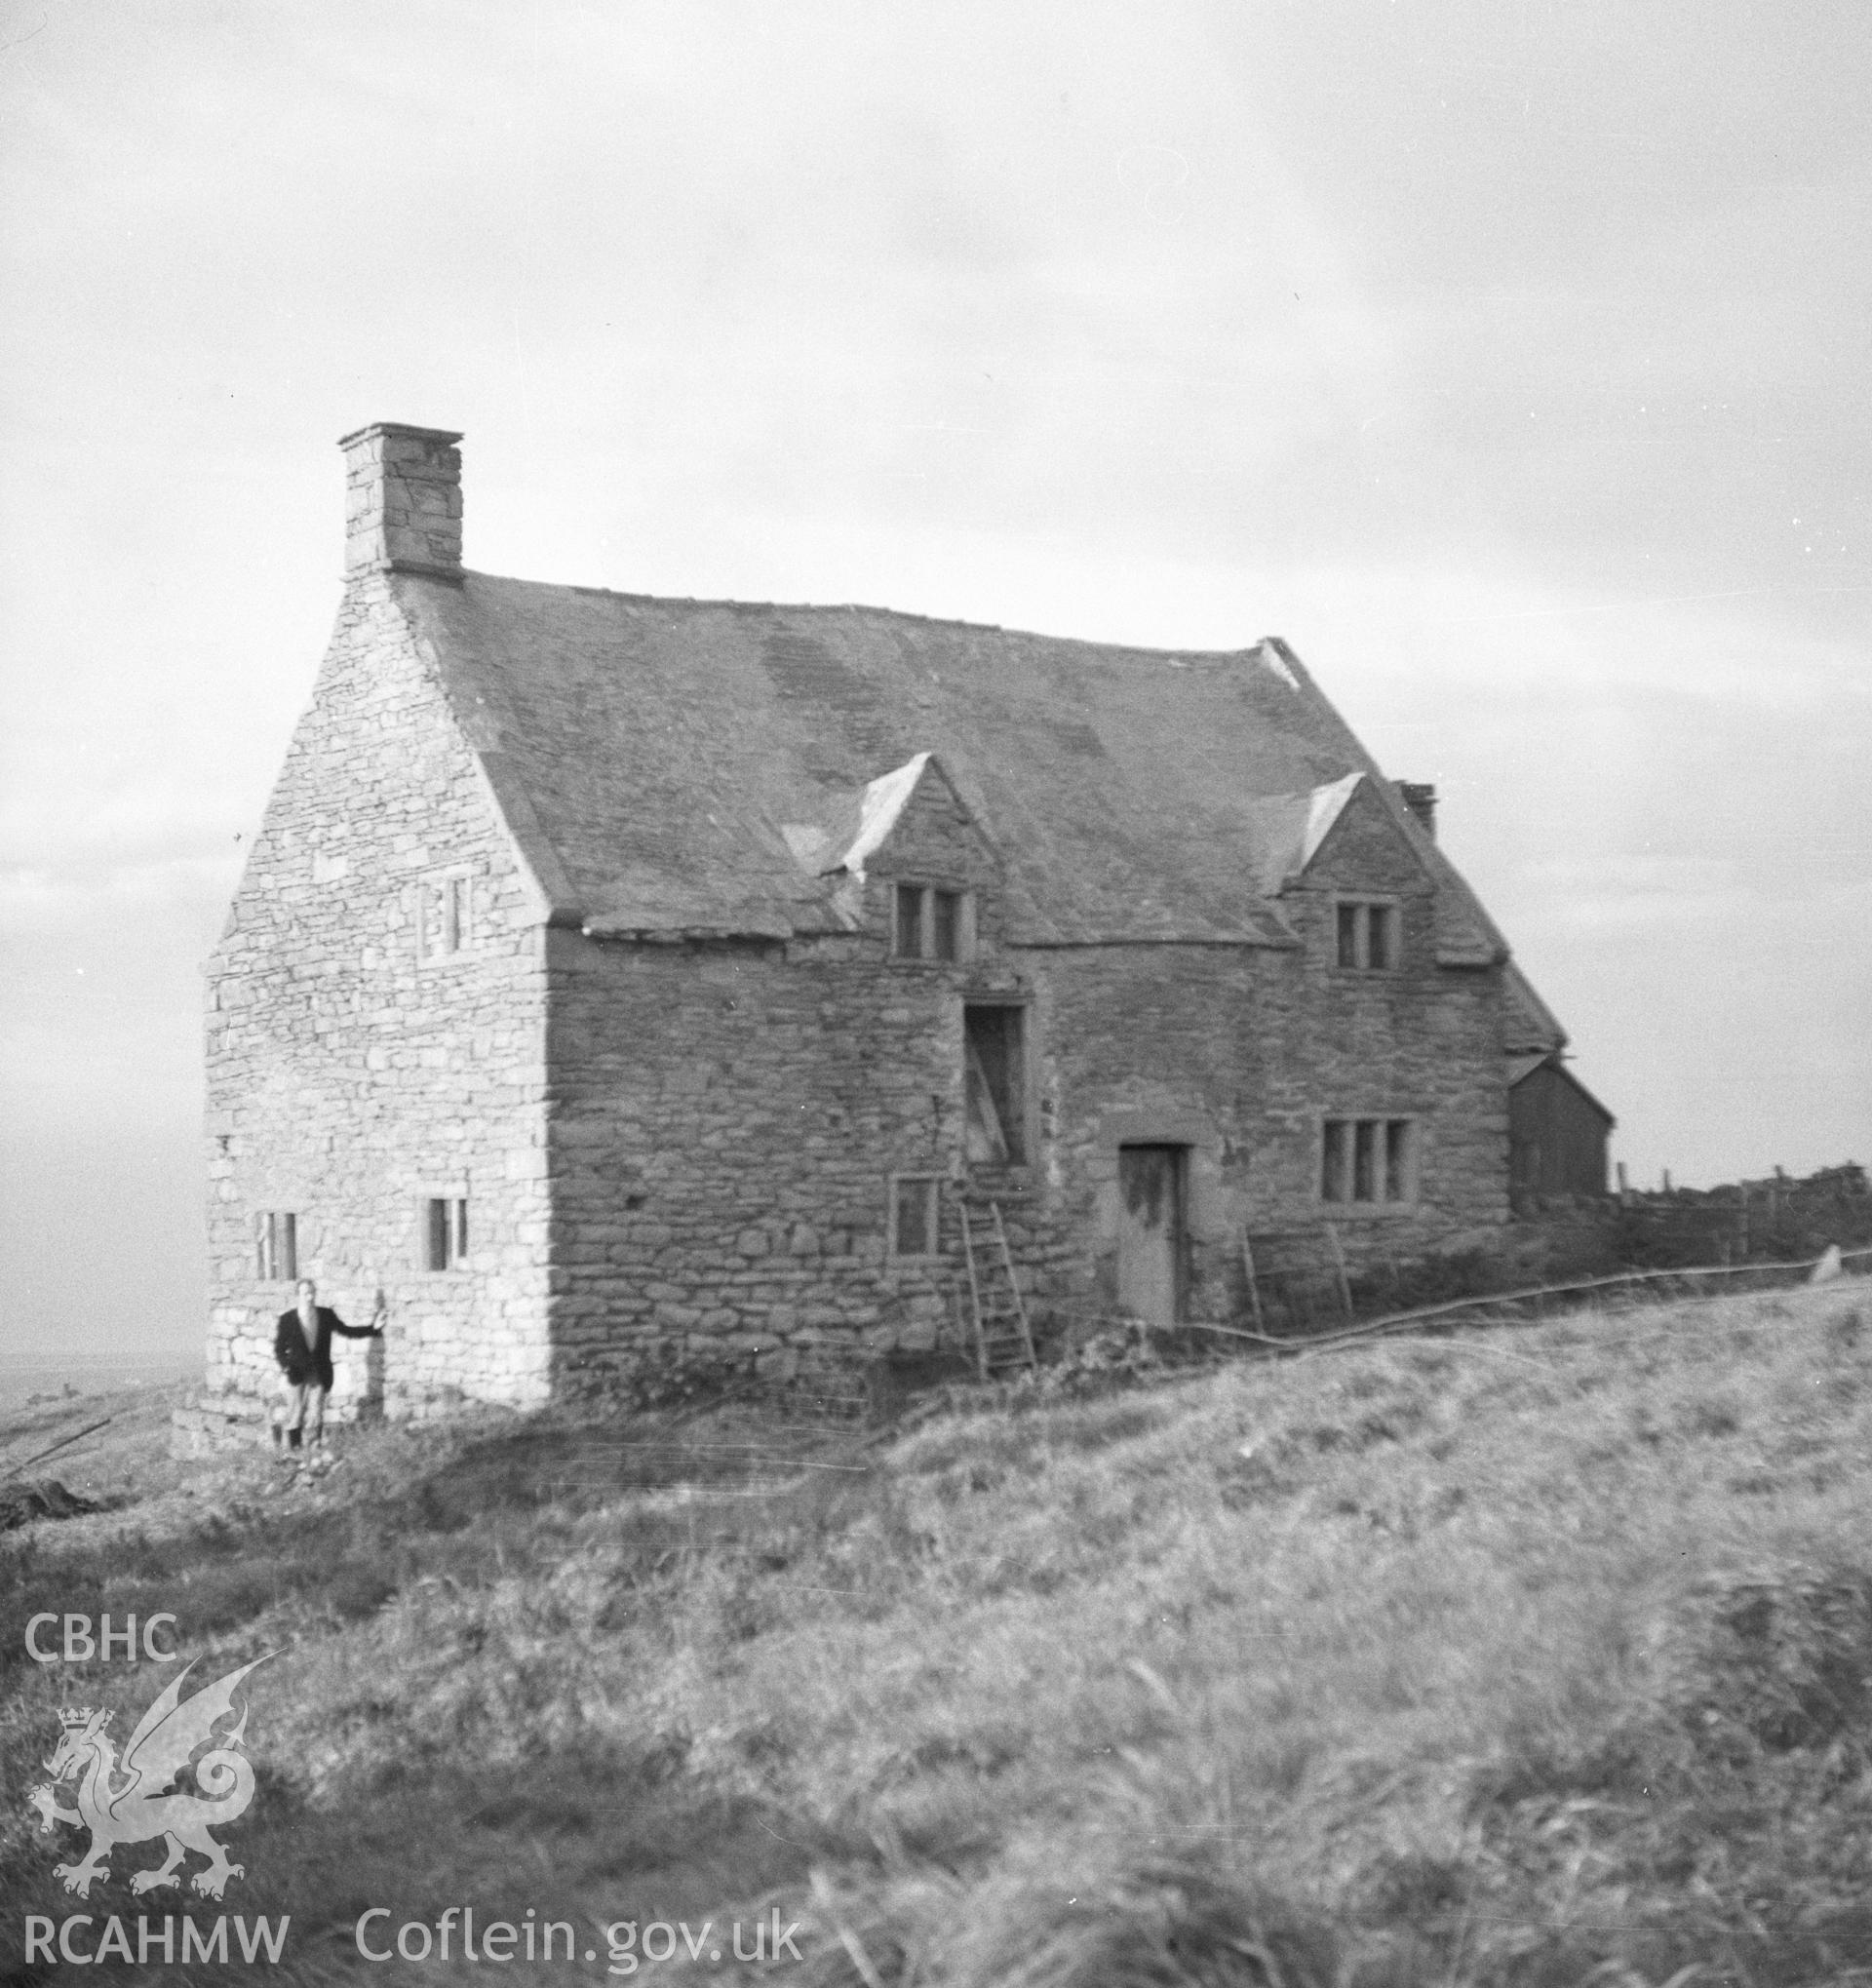 Digital copy of a black and white nitrate negative, exterior view of 'Llysty' near Llanasa in 1960.